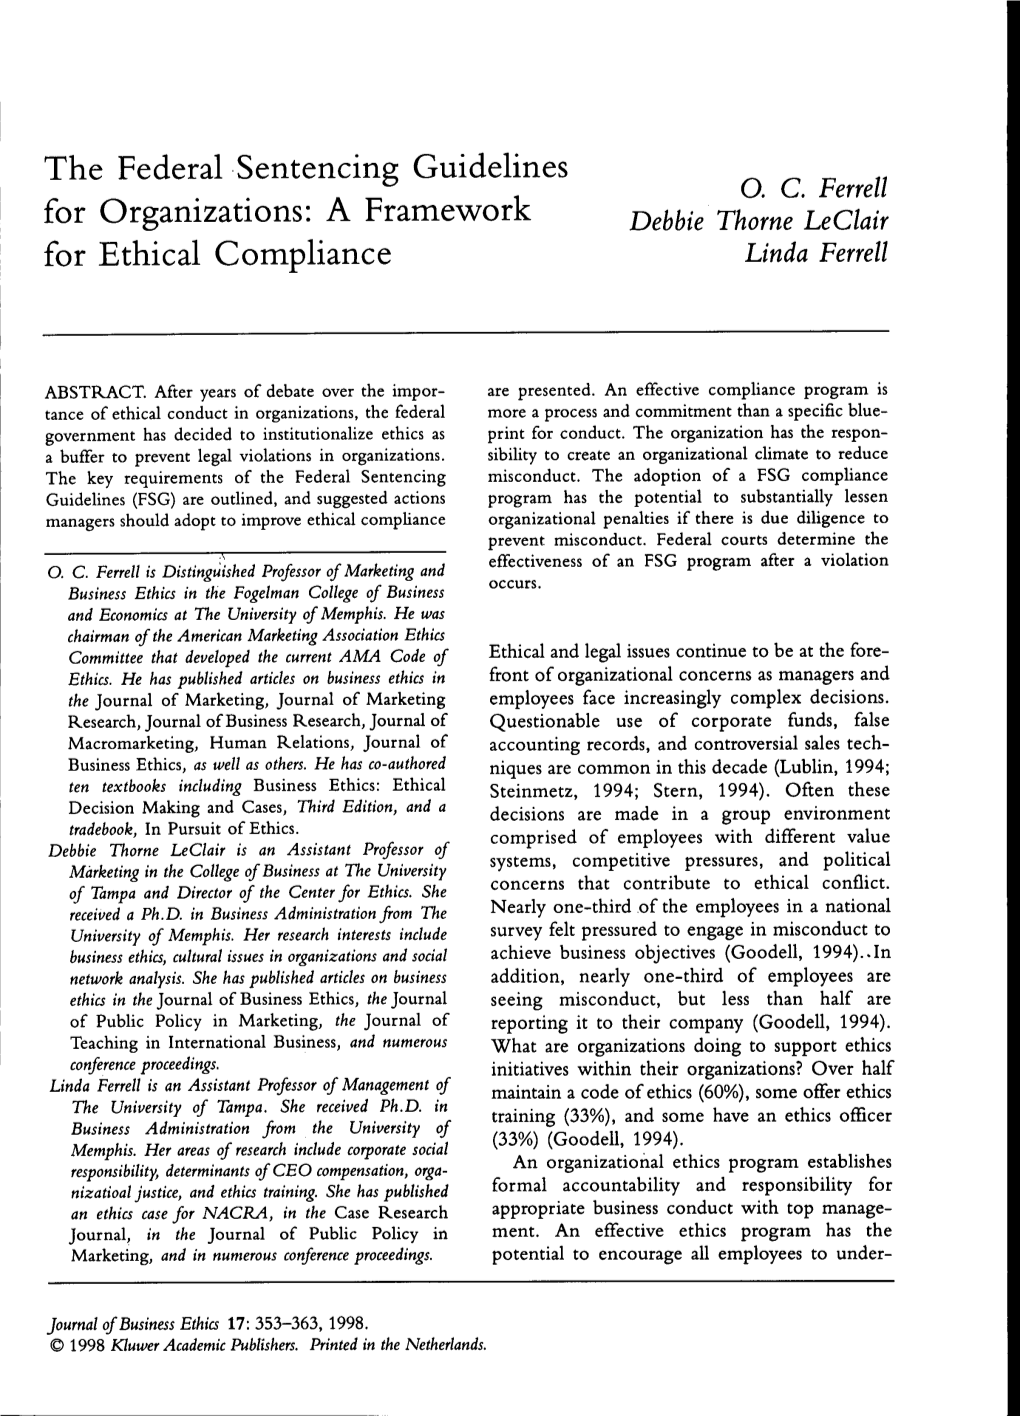 The Federal Sentencing Guidelines for Organizations: a Framework for Ethical Compliance